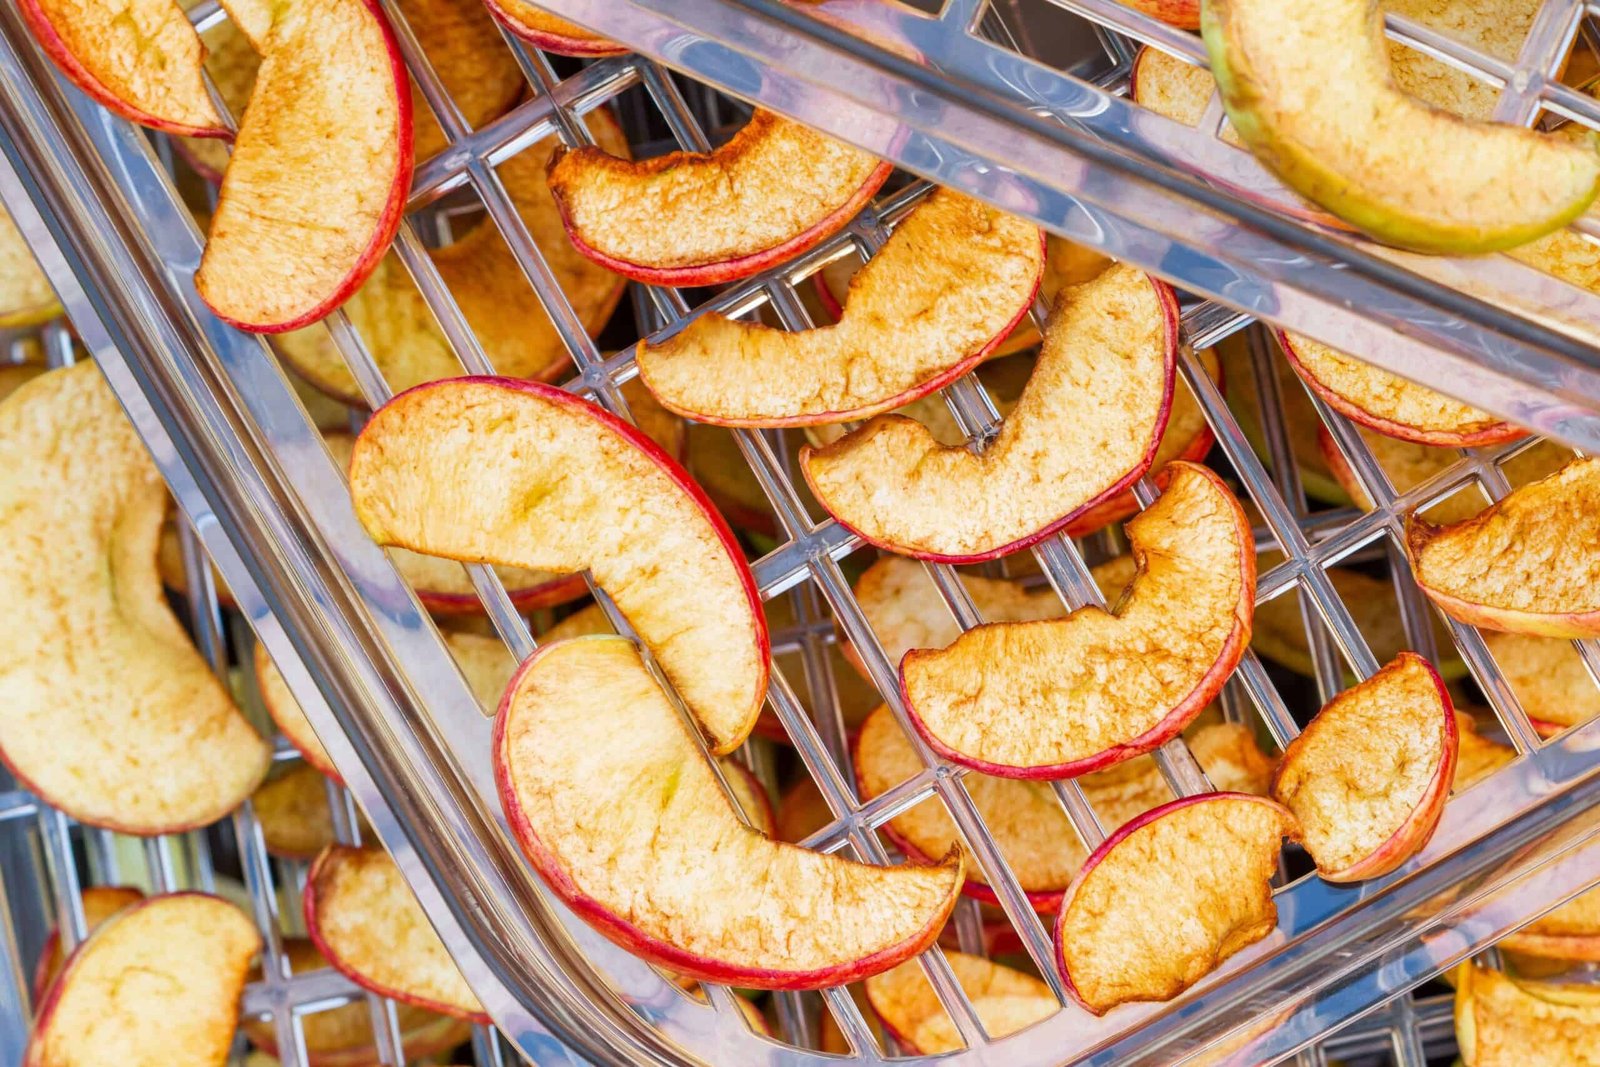 sliced red apples finished dehydrating